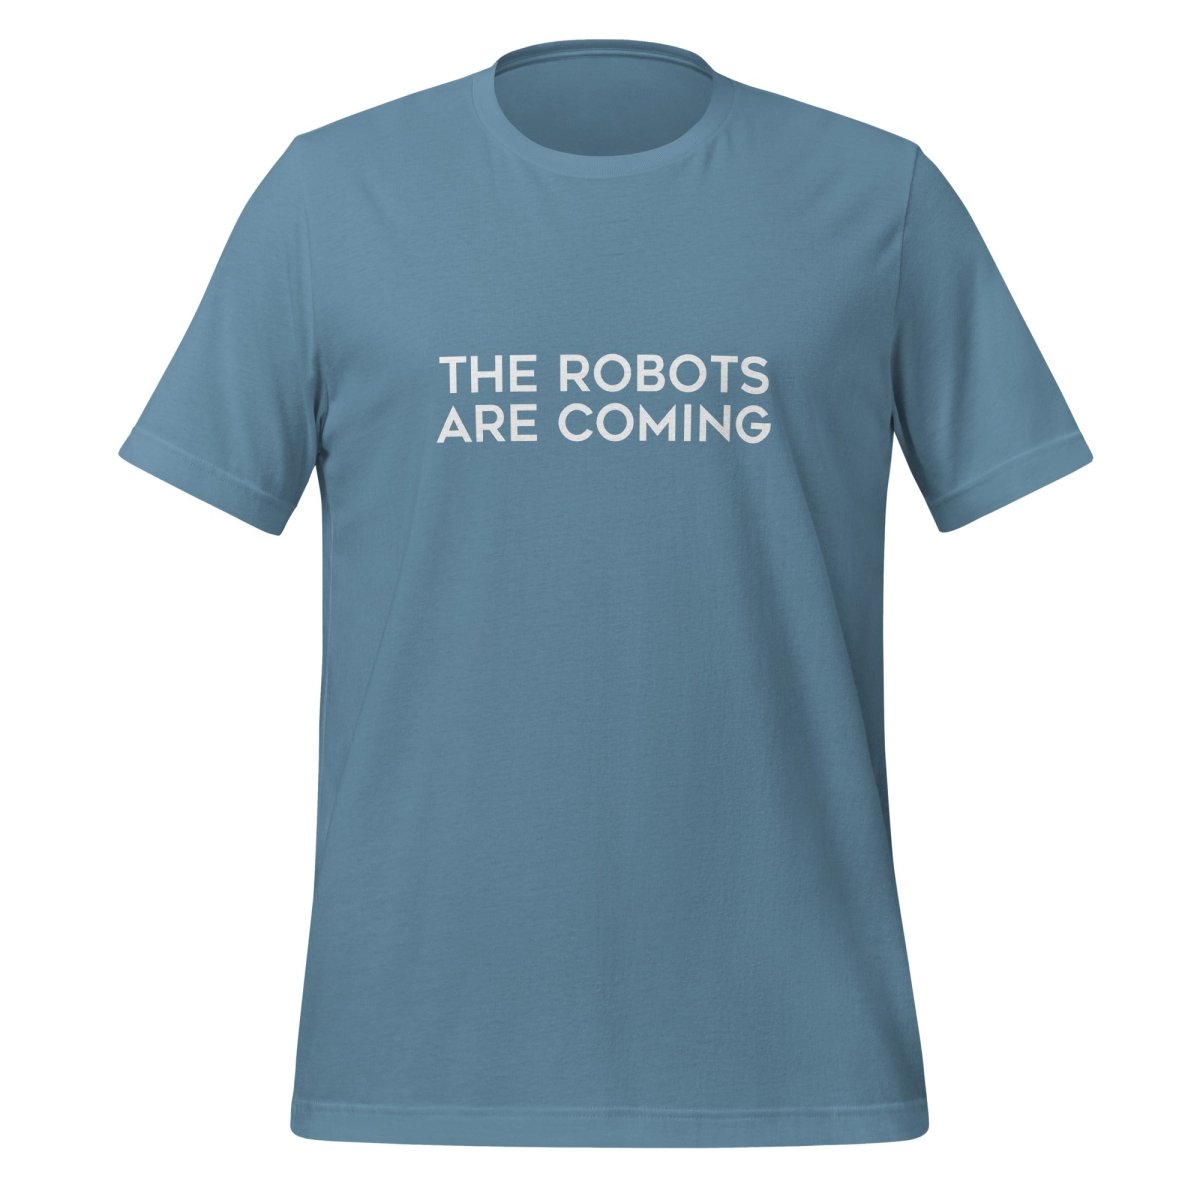 The Robots Are Coming T - Shirt 1 (unisex) - Steel Blue - AI Store